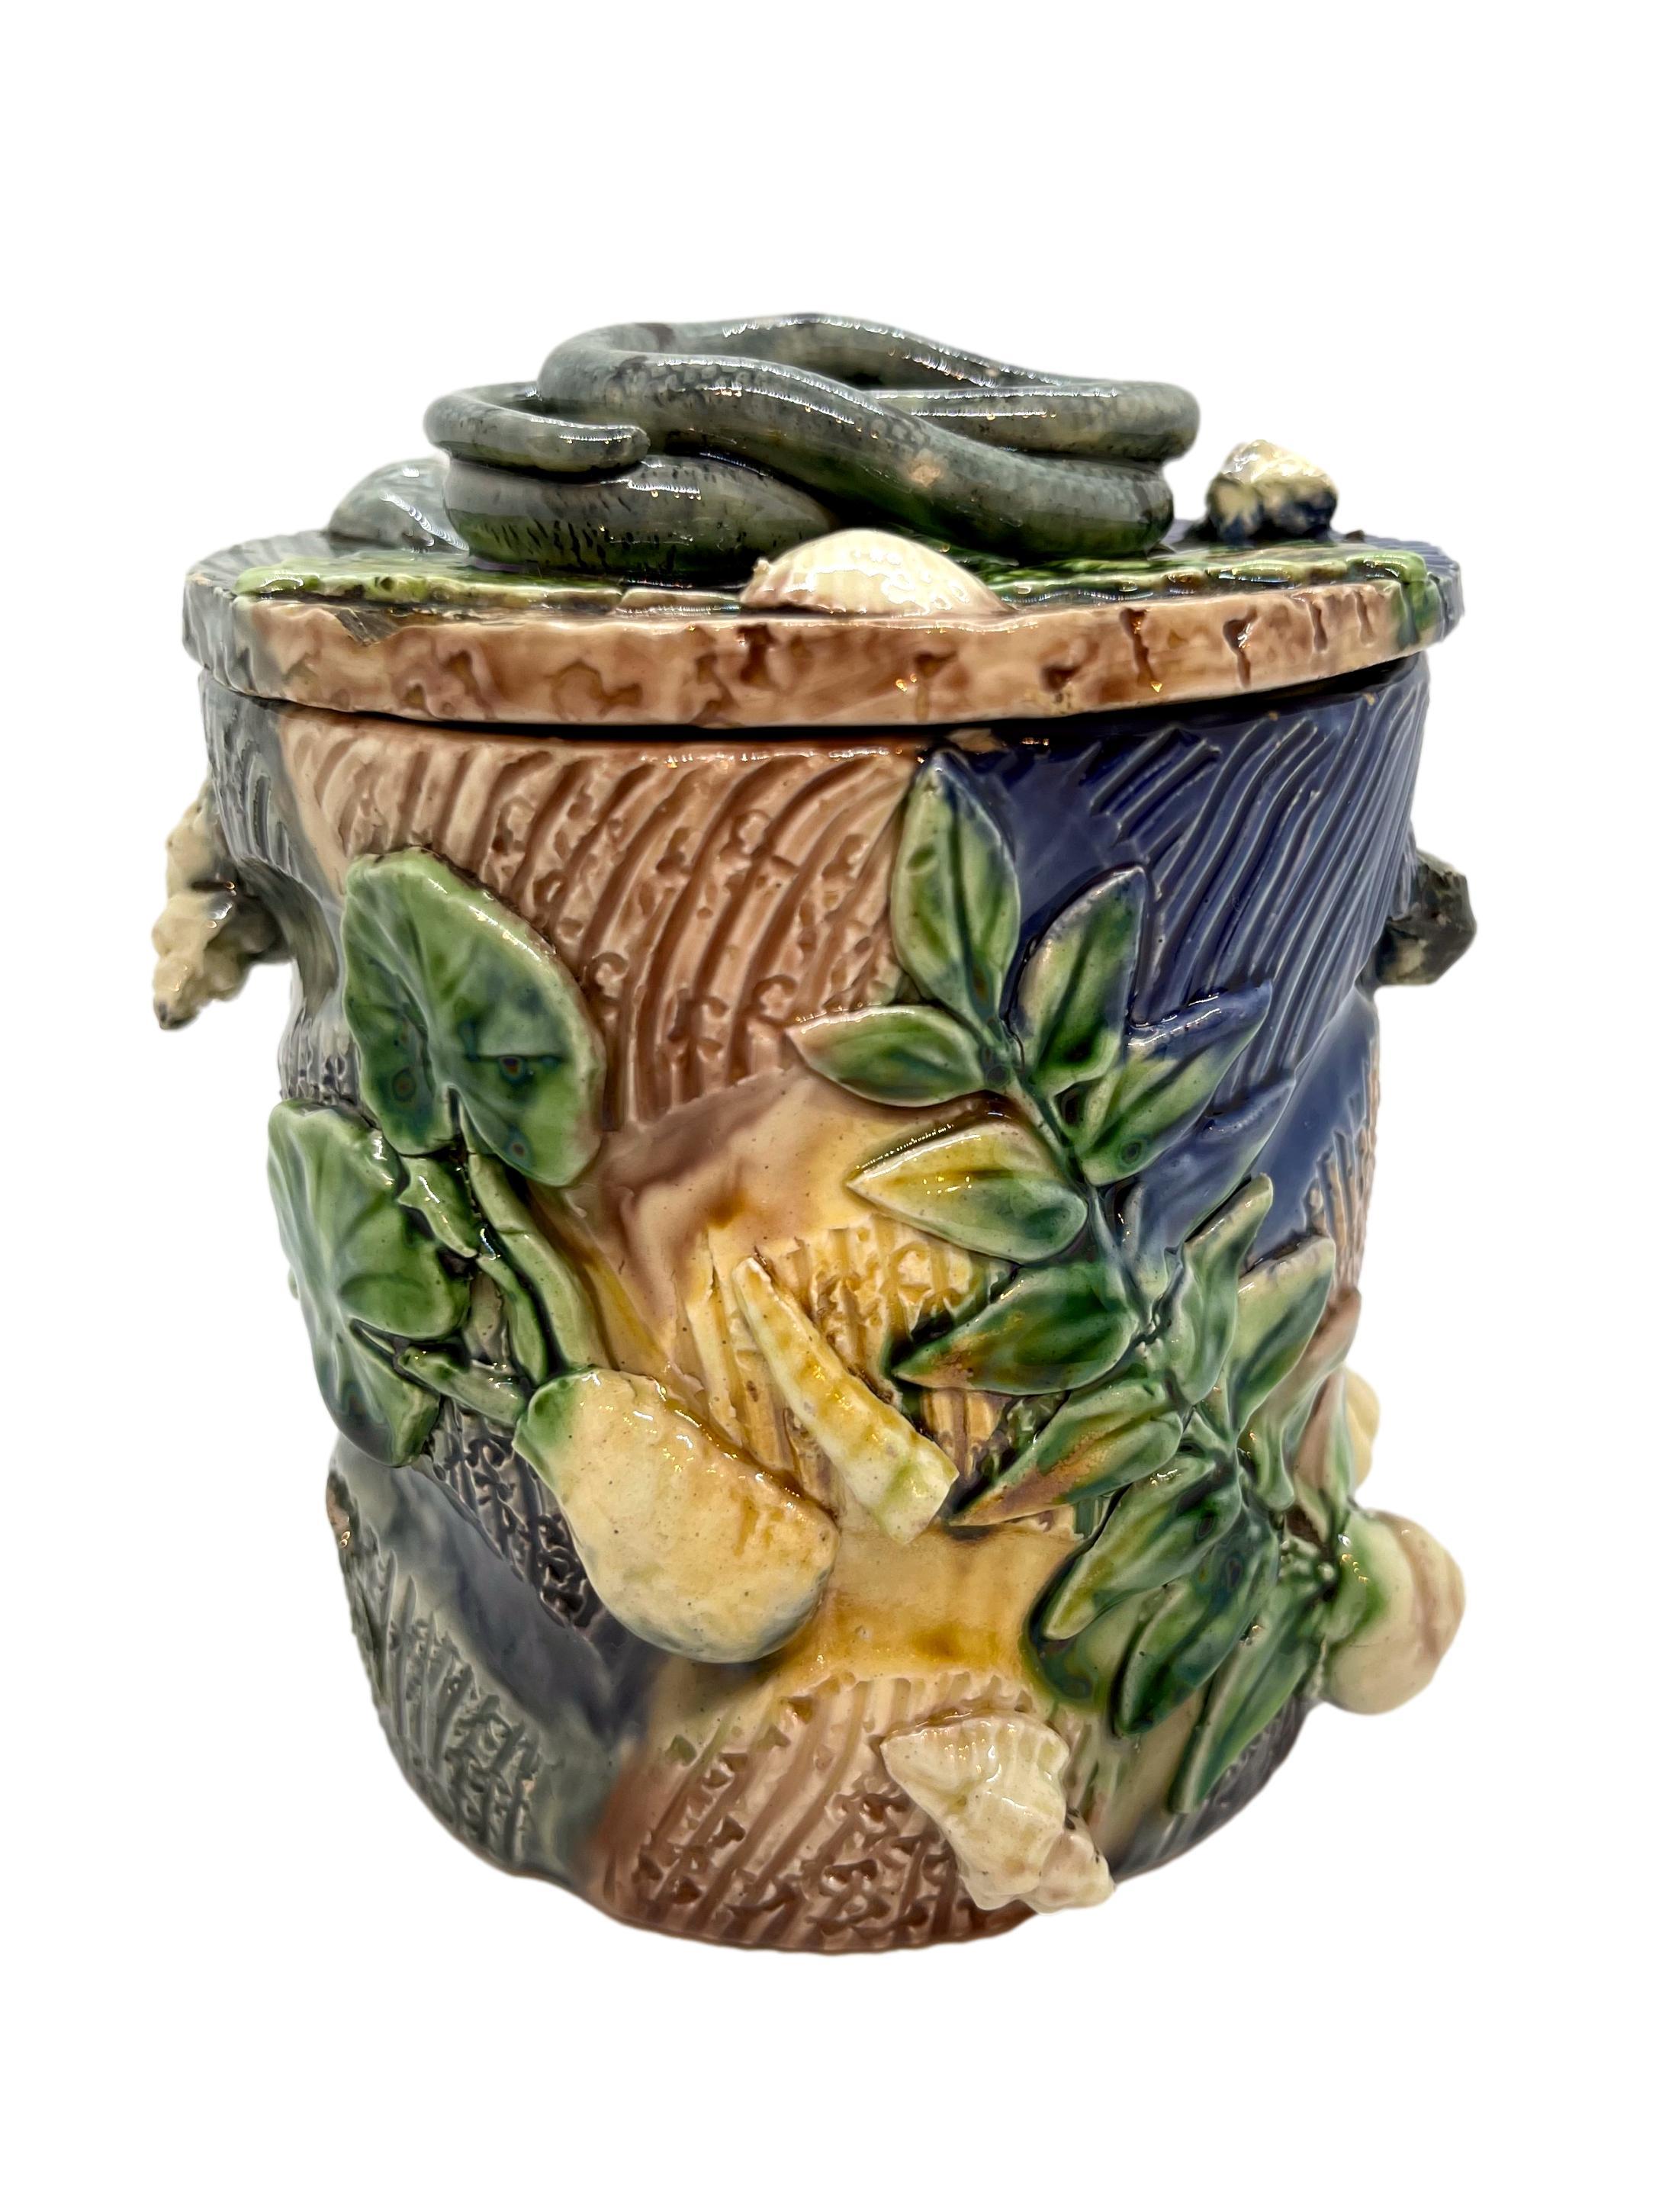 French Thomas Sergent Majolica Palissy Ware Humidor with Coiled Snake on Lid, ca, 1880 